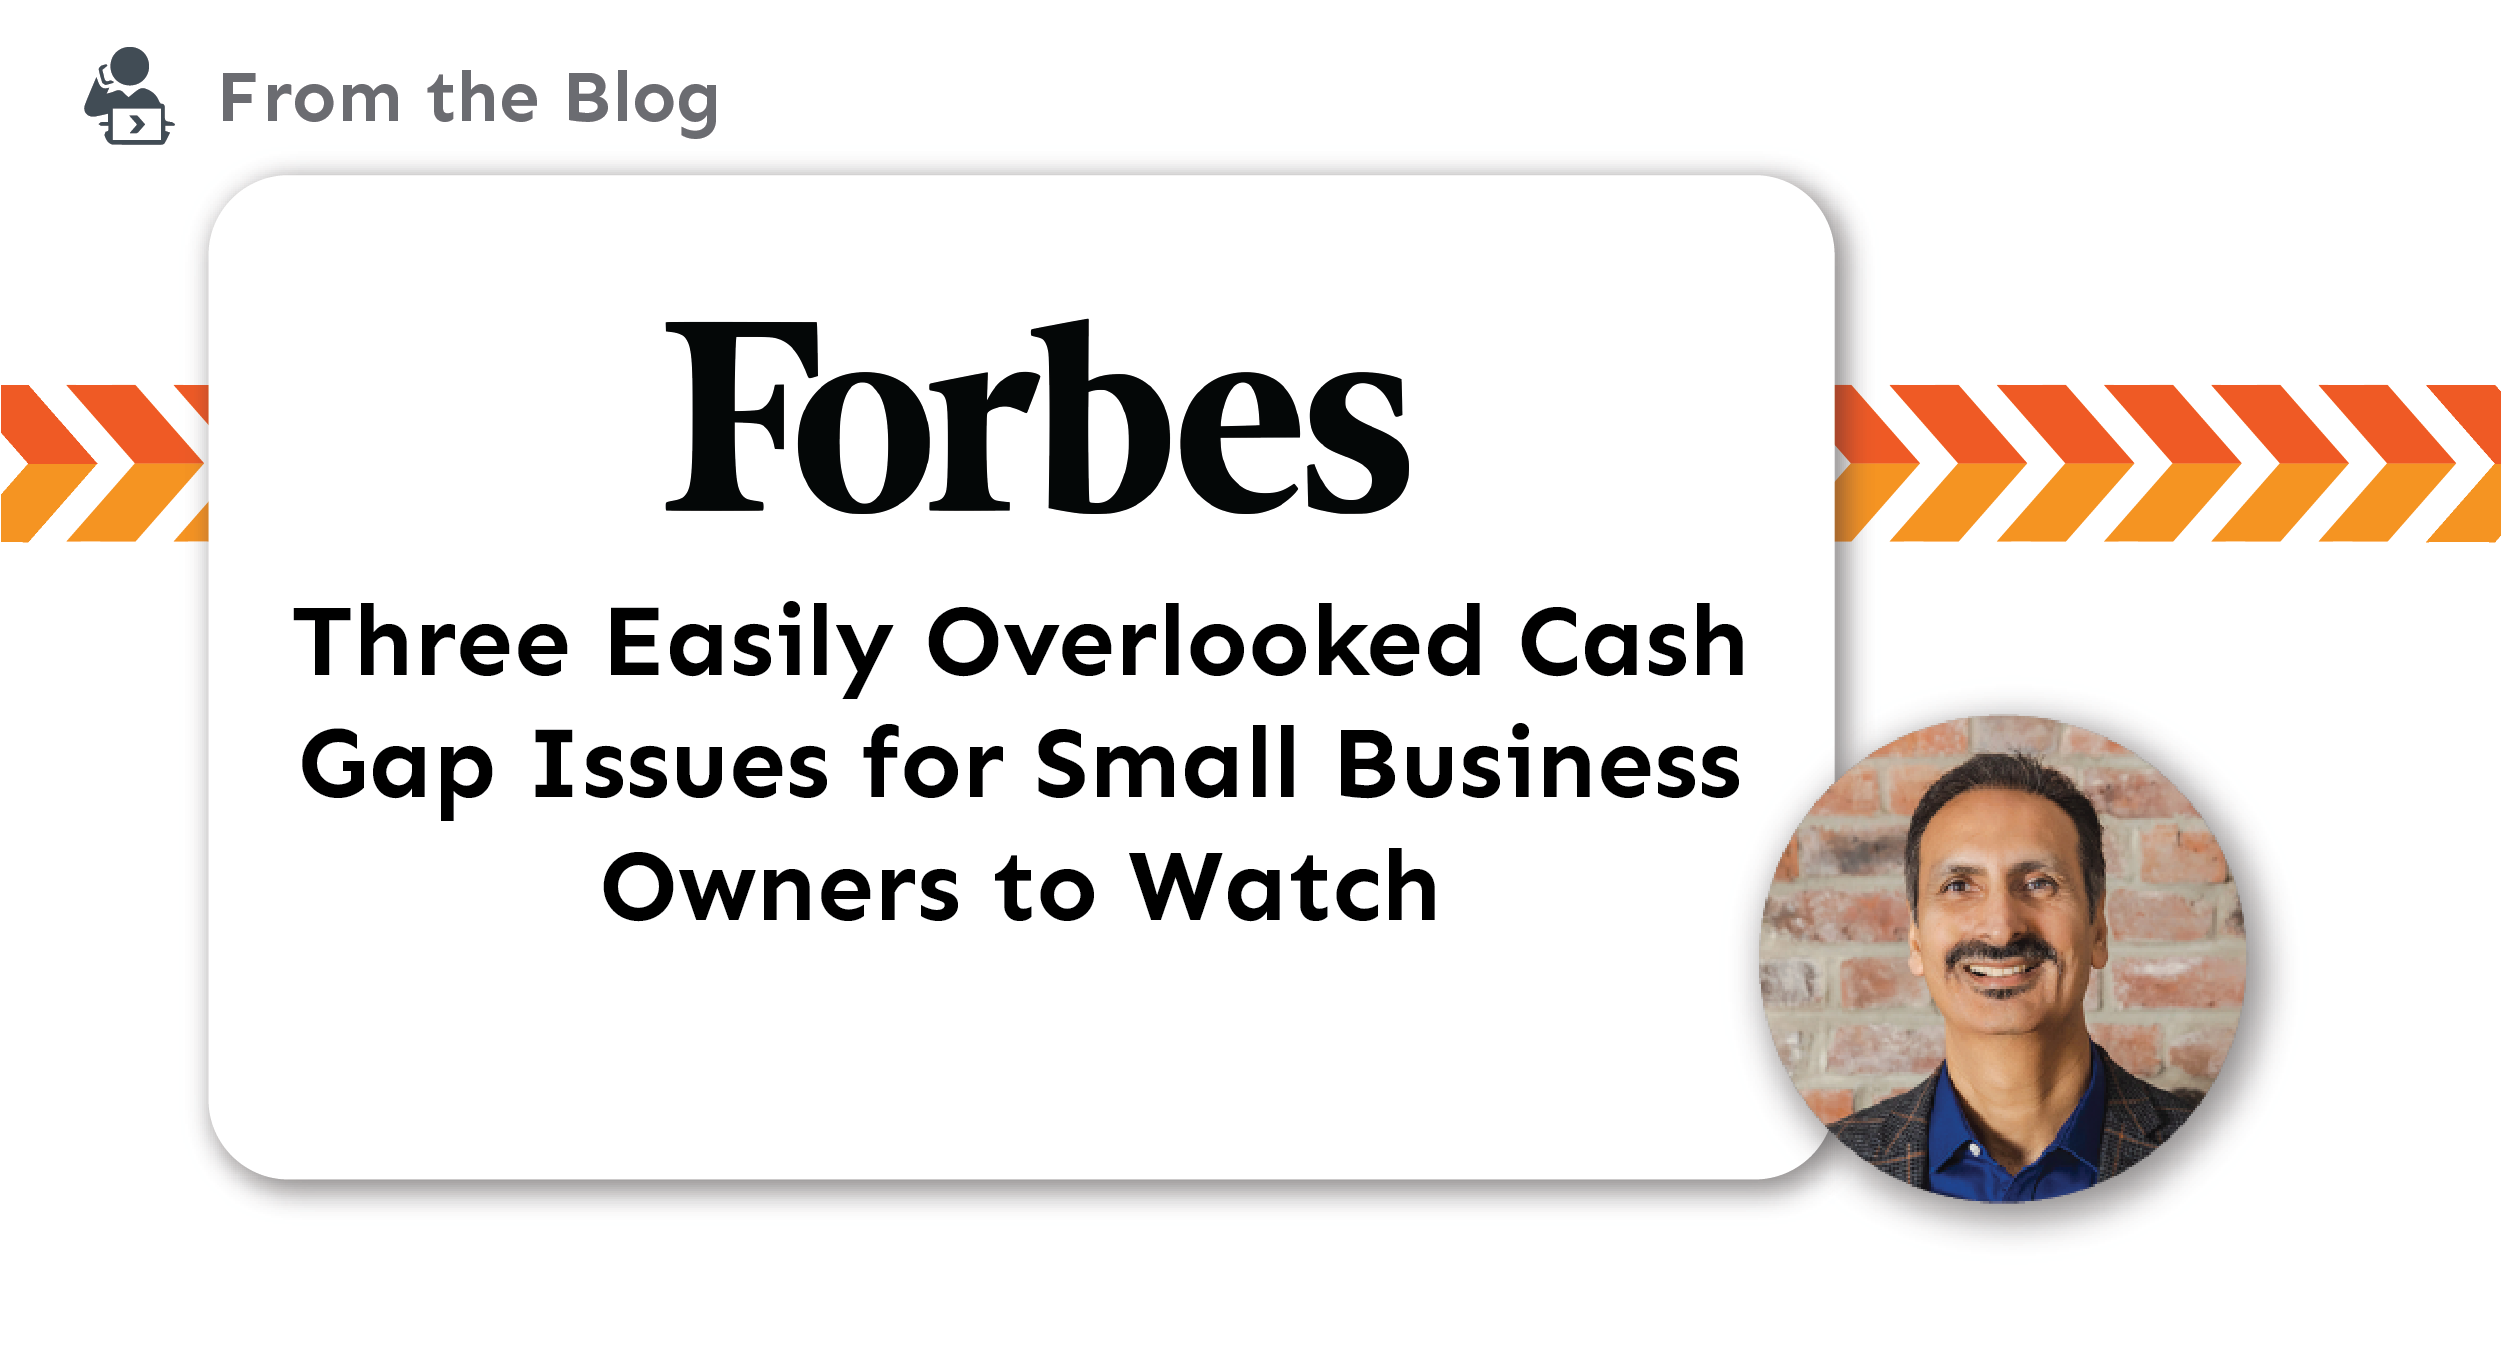 Three Easily Overlooked Cash Gap Issues for Small Business Owners to Watch